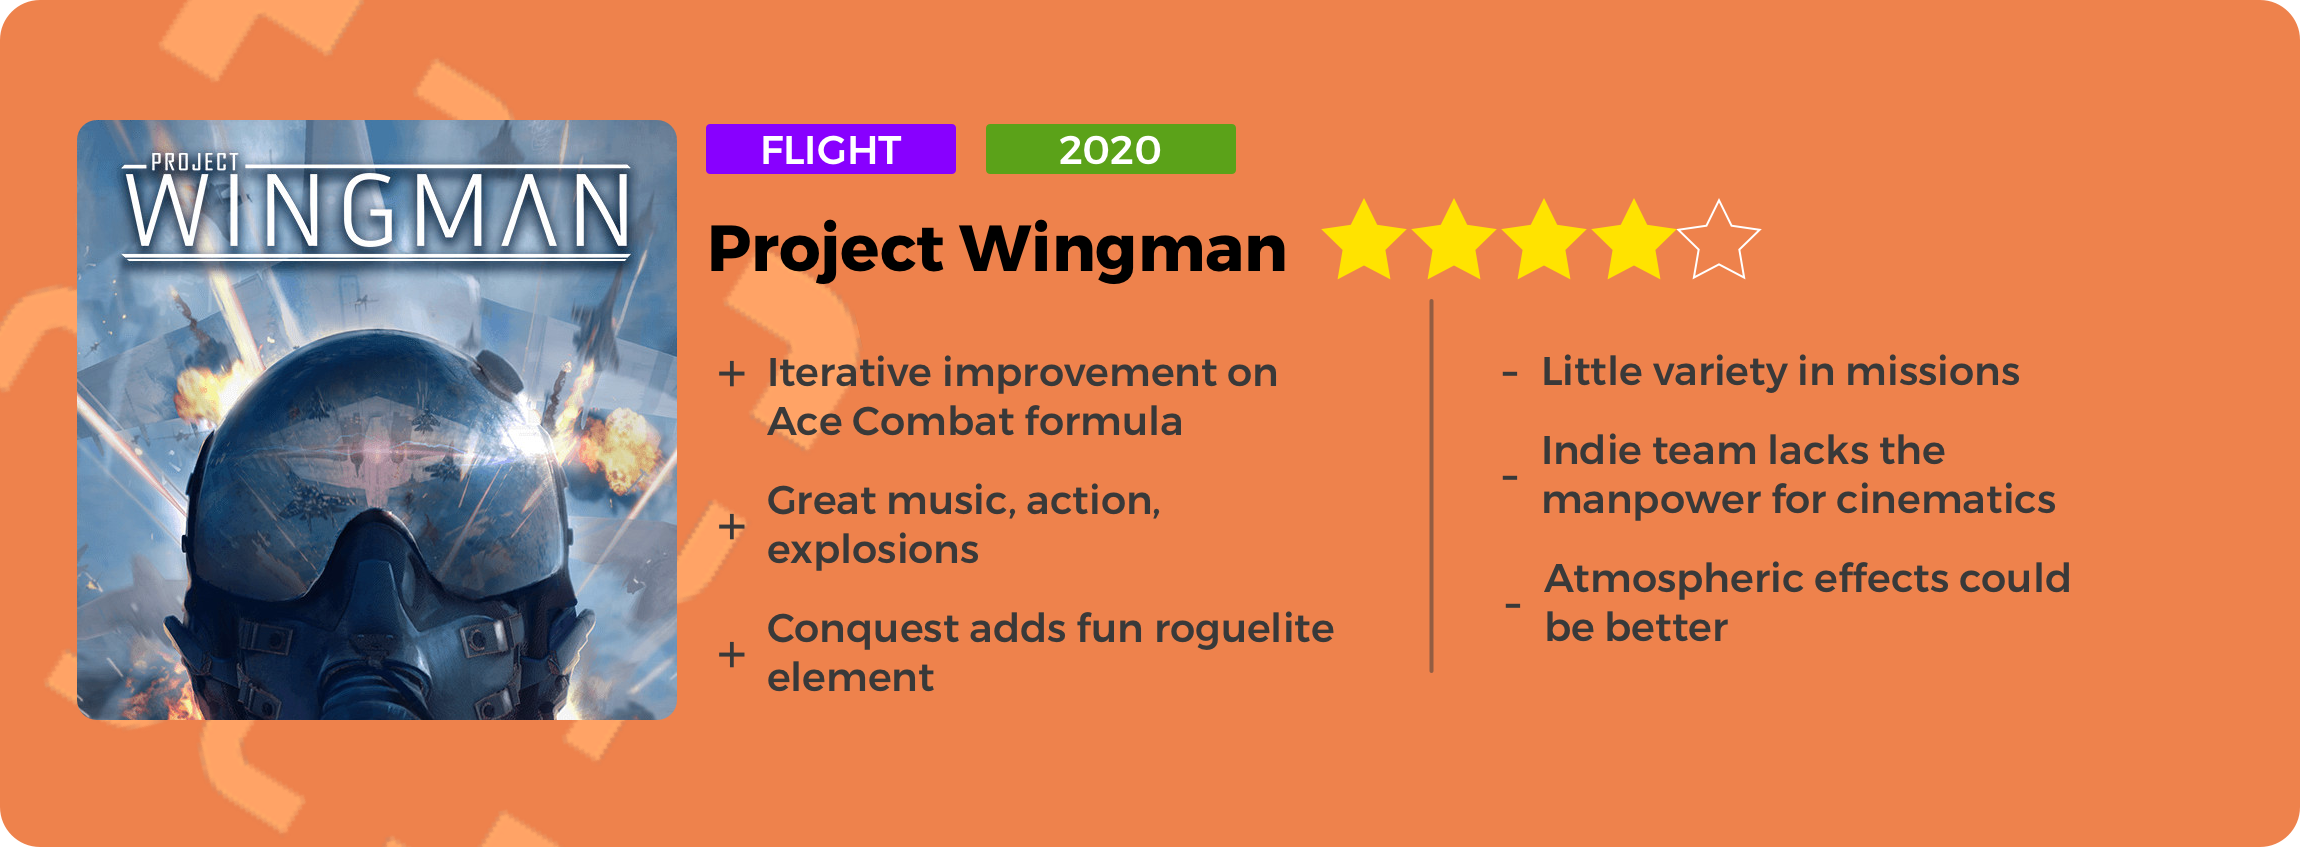 Project Wingman - TheGamer Review